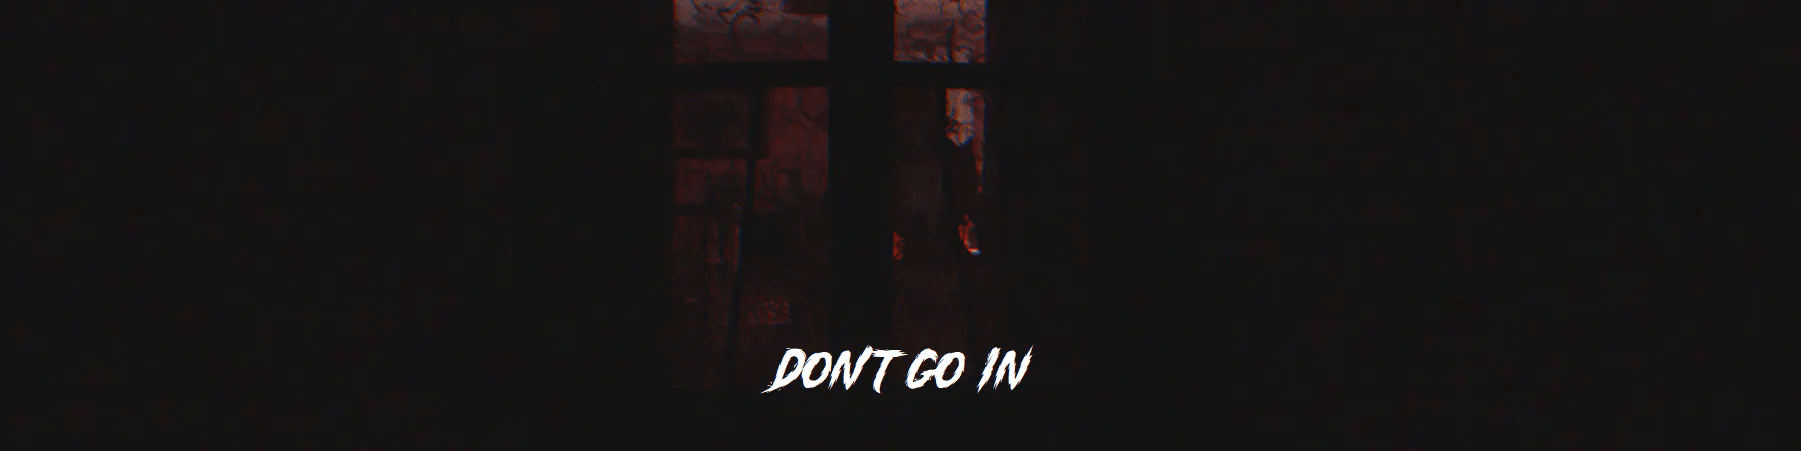 Don't Go In